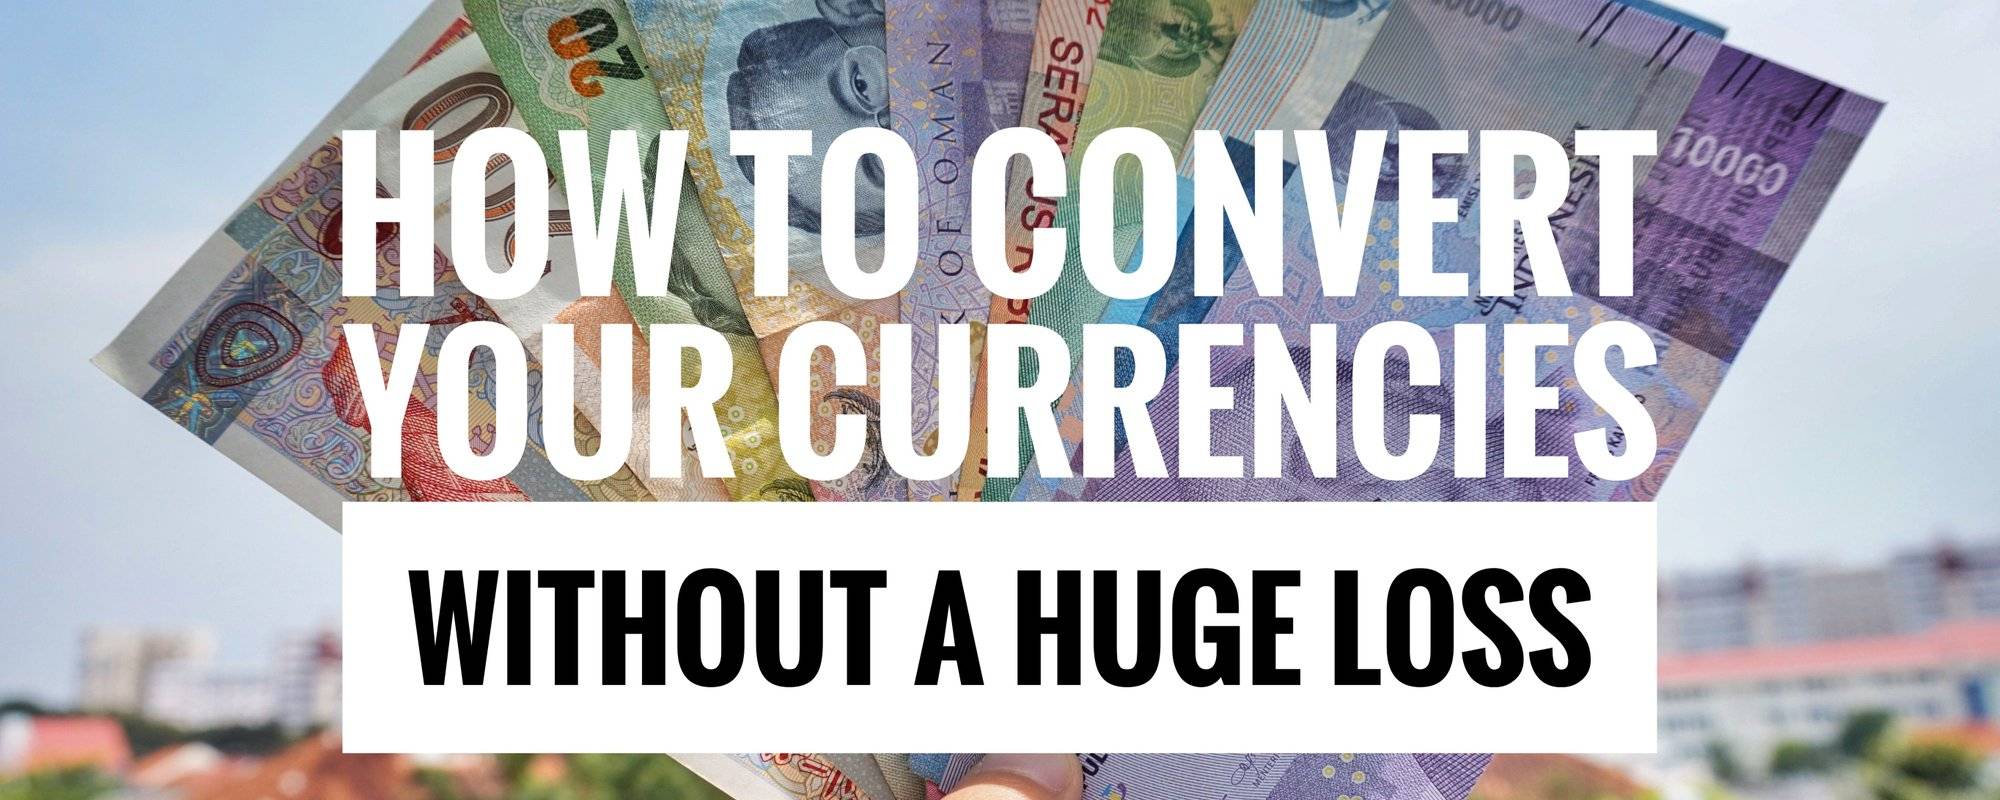 Travel Hack 18: How to Convert Your Currencies Without A Huge Loss!